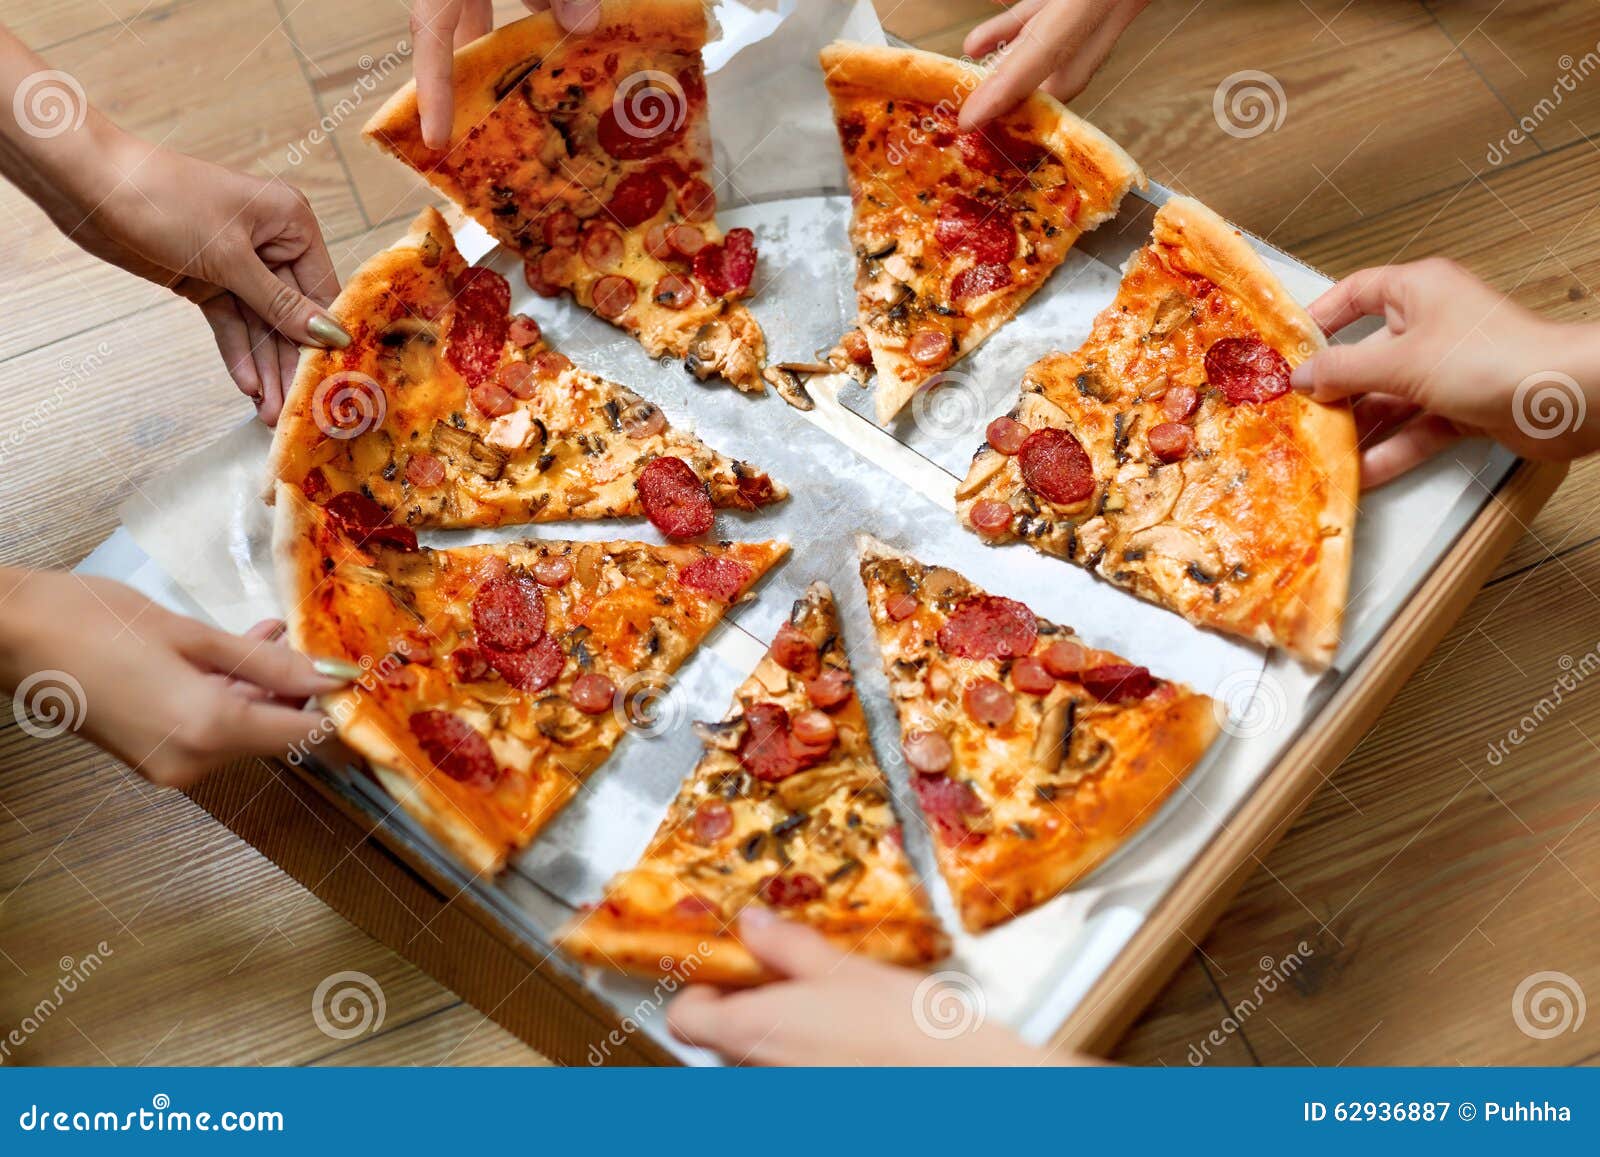 eating food. people taking pizza slices. friends leisure, fast f